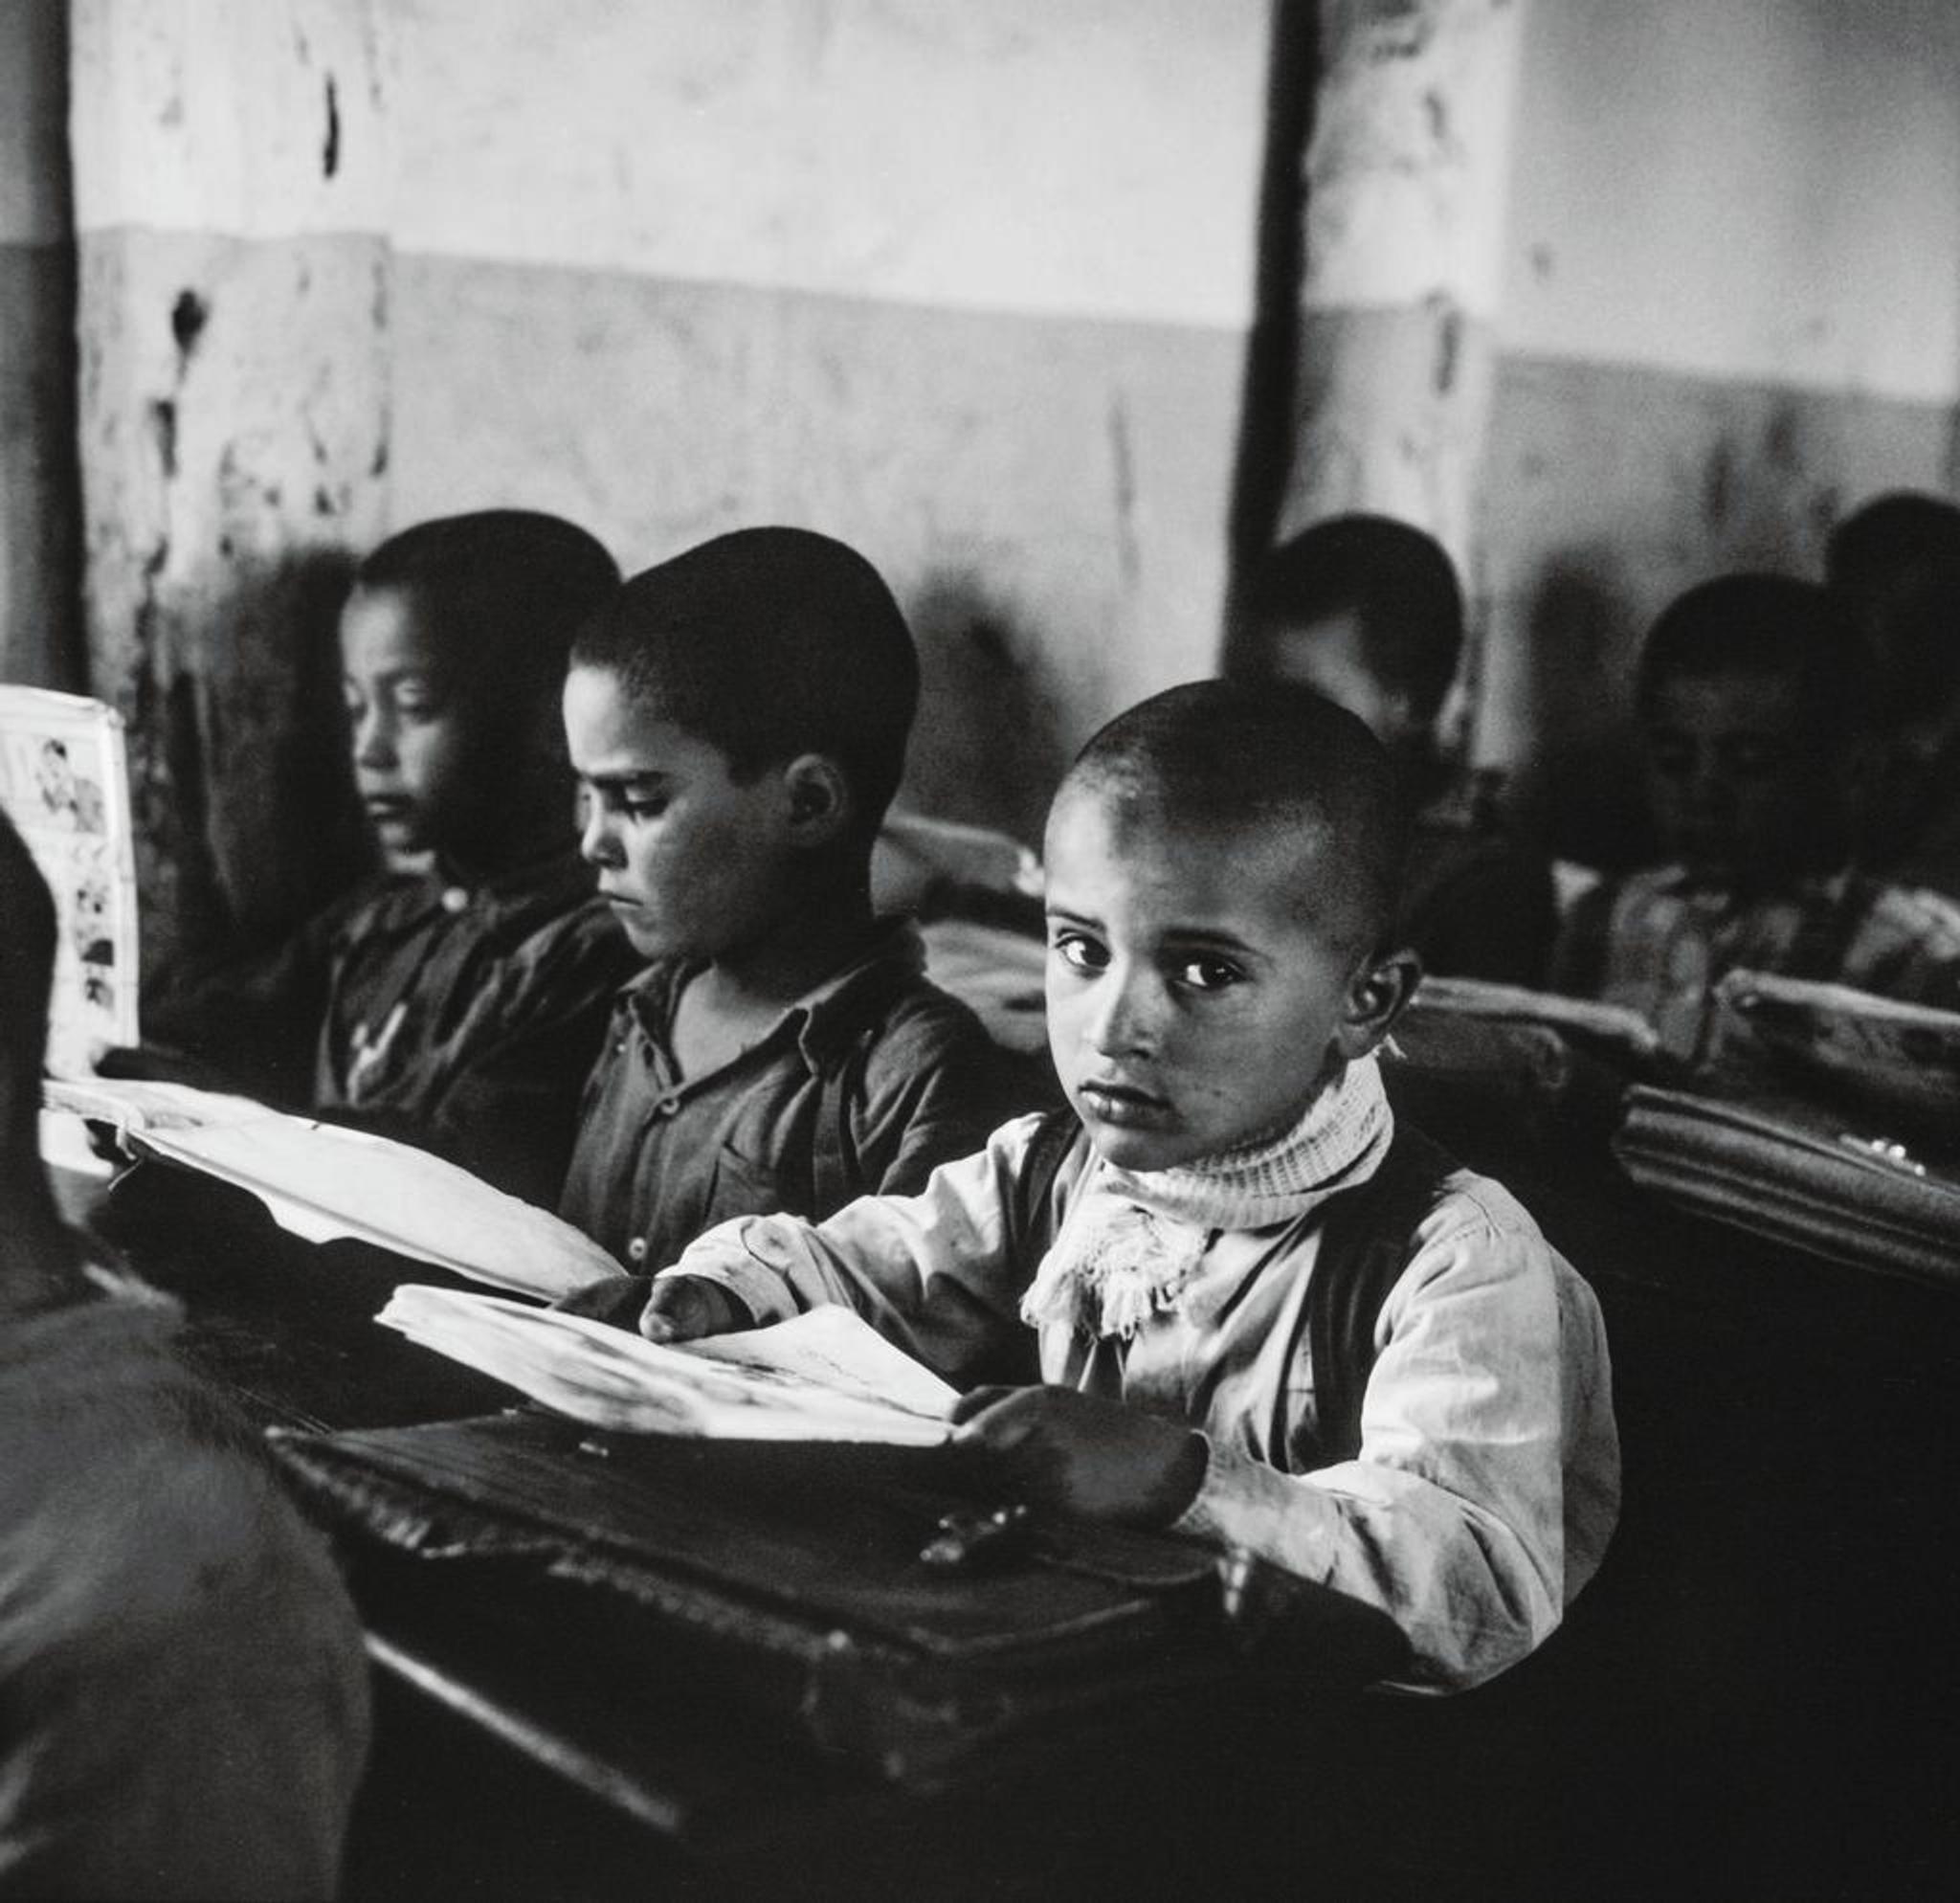 A group of boys in a classroom, open books on the desks, one boy is looking in the camera with a serious face